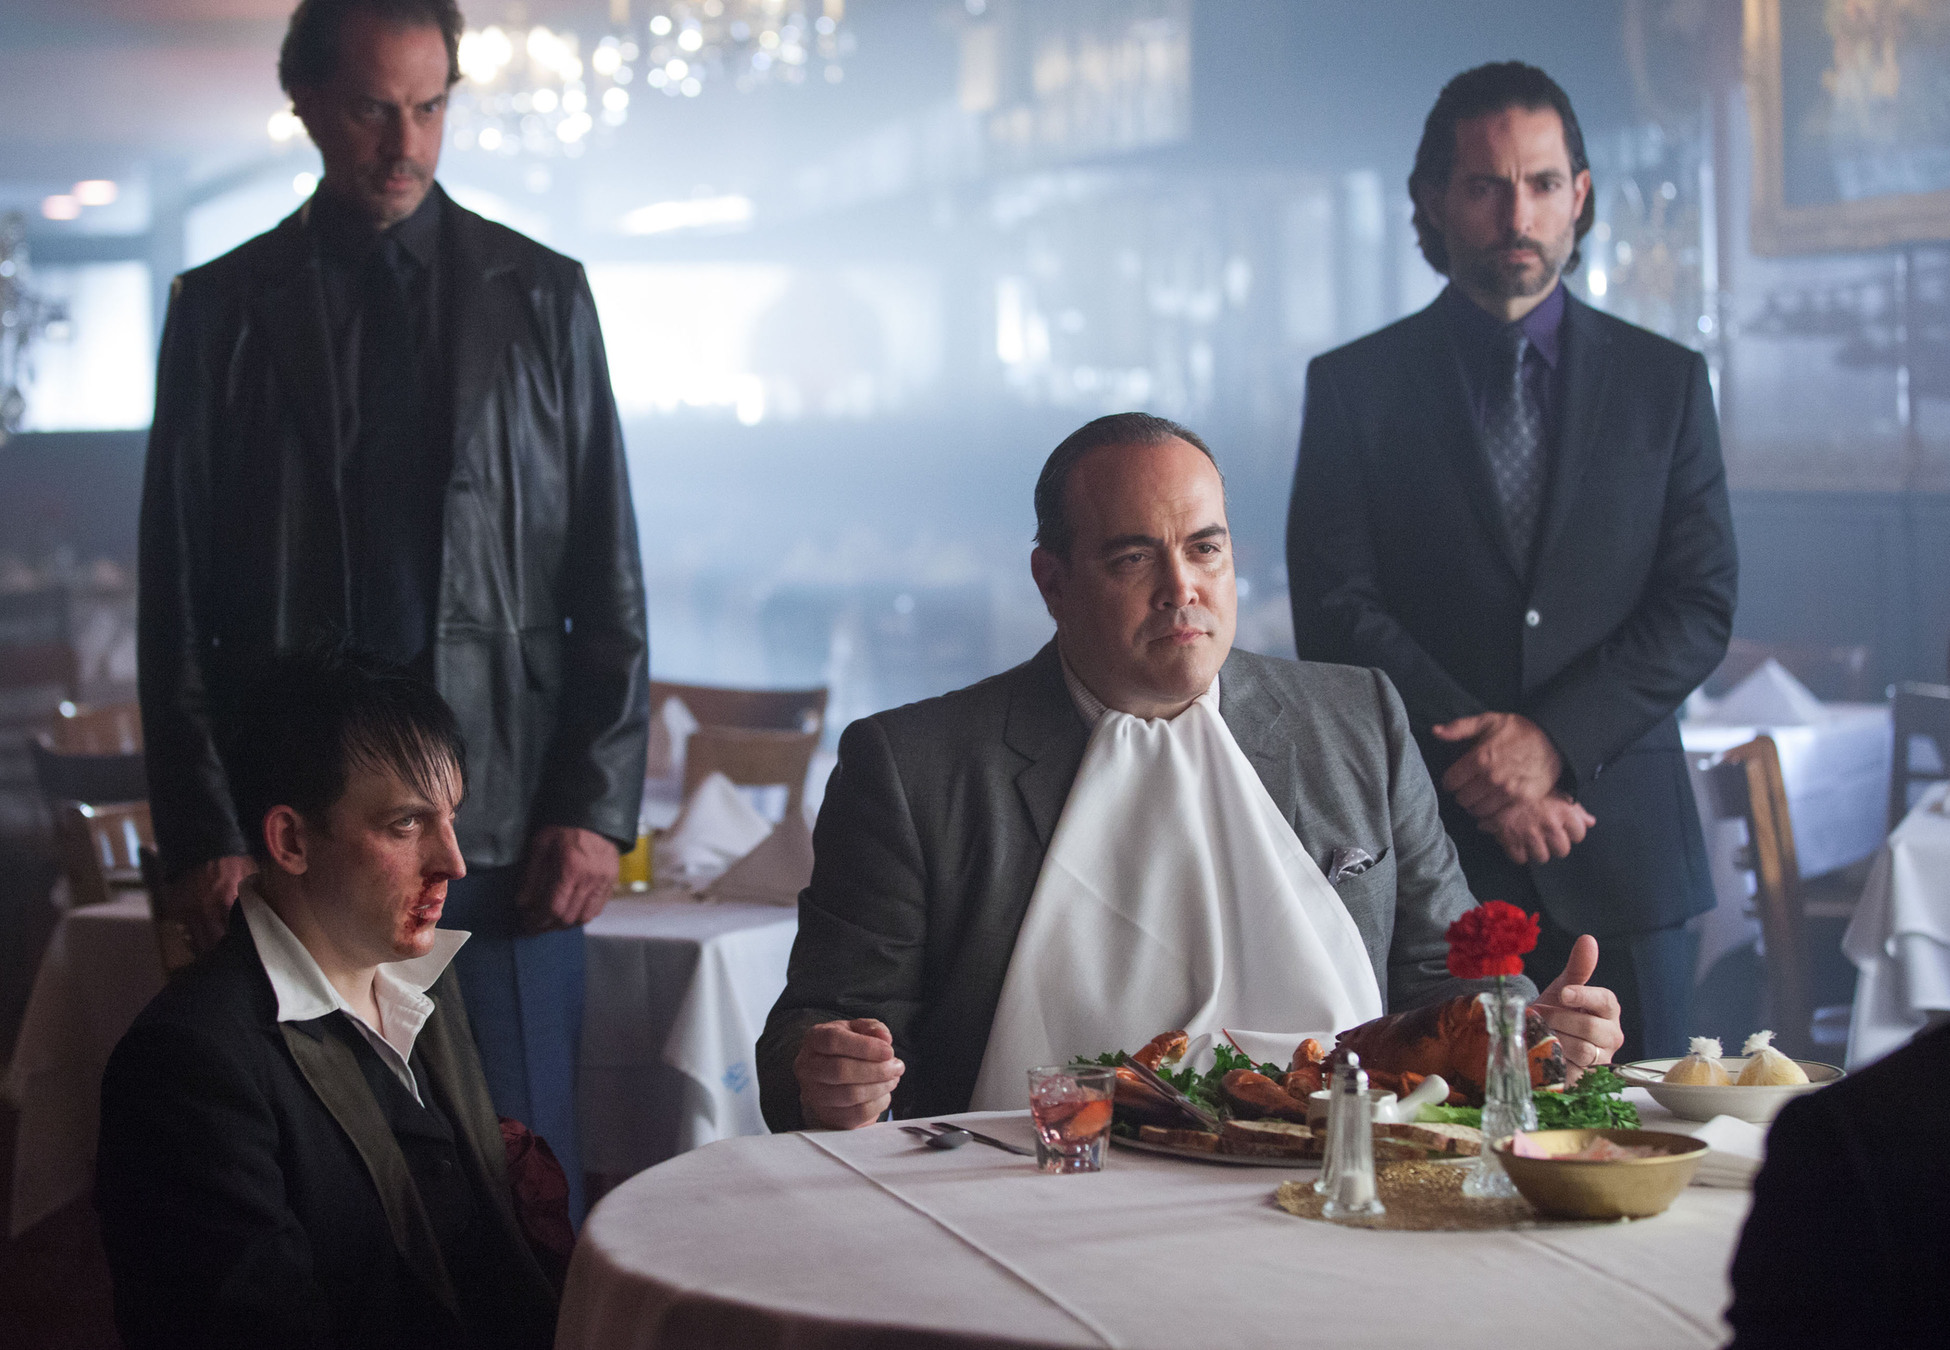 GOTHAM: Maroni (guest star David Zayas, C) tests the loyalty of Oswald Cobblepot (Robin Lord Taylor, L) in the "Viper" episode of GOTHAM airing Monday, Oct. 20 (8:00-9:00 PM ET/PT) on FOX. Â©2014 Fox Broadcasting Co. Cr: Jessica Miglio/FOX